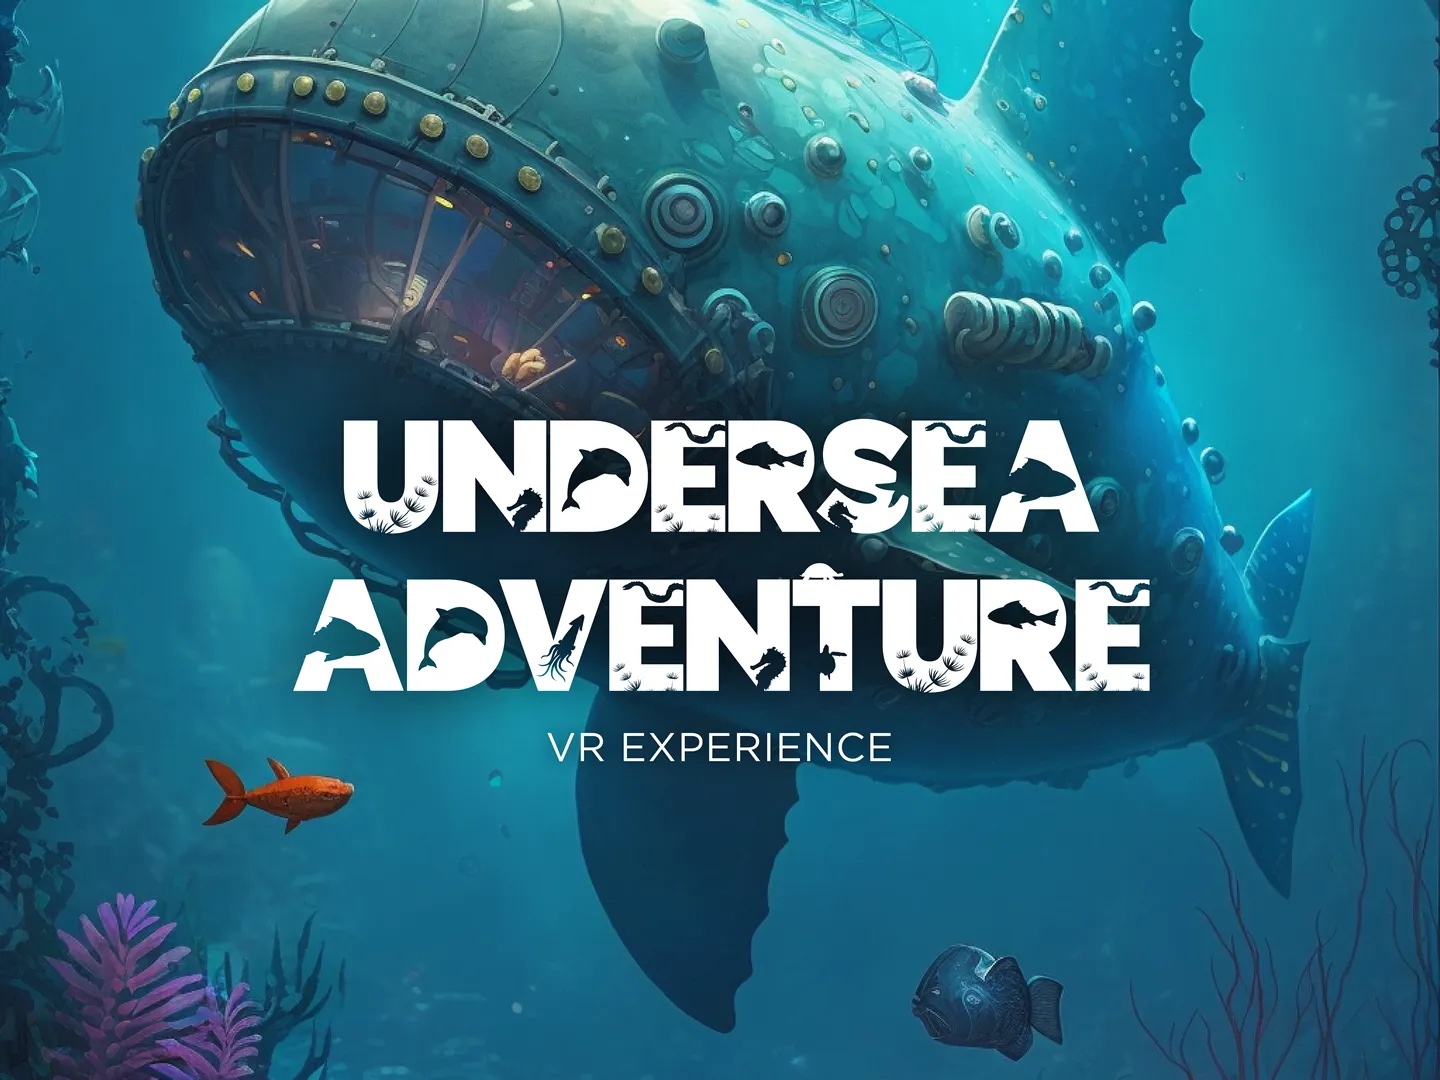 Undersea Adventure game showing a giant whale shaped steampunk inspired submarine deep in the ocean.